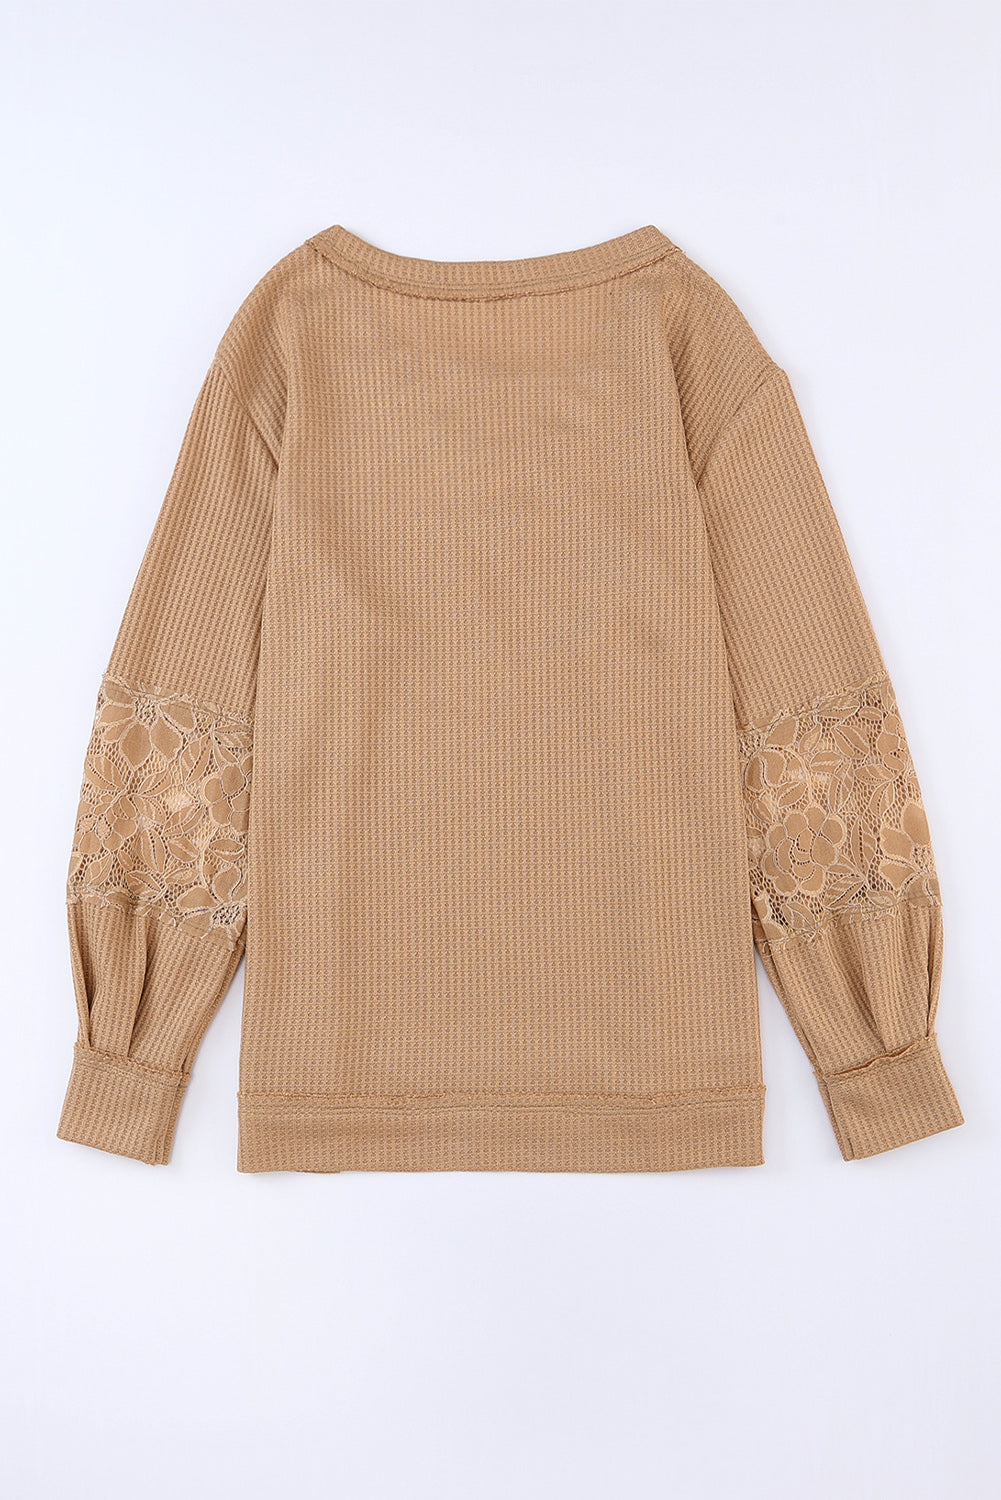 Apricot Lace Waffle Patchwork Strappy V Neck Long Sleeve Top